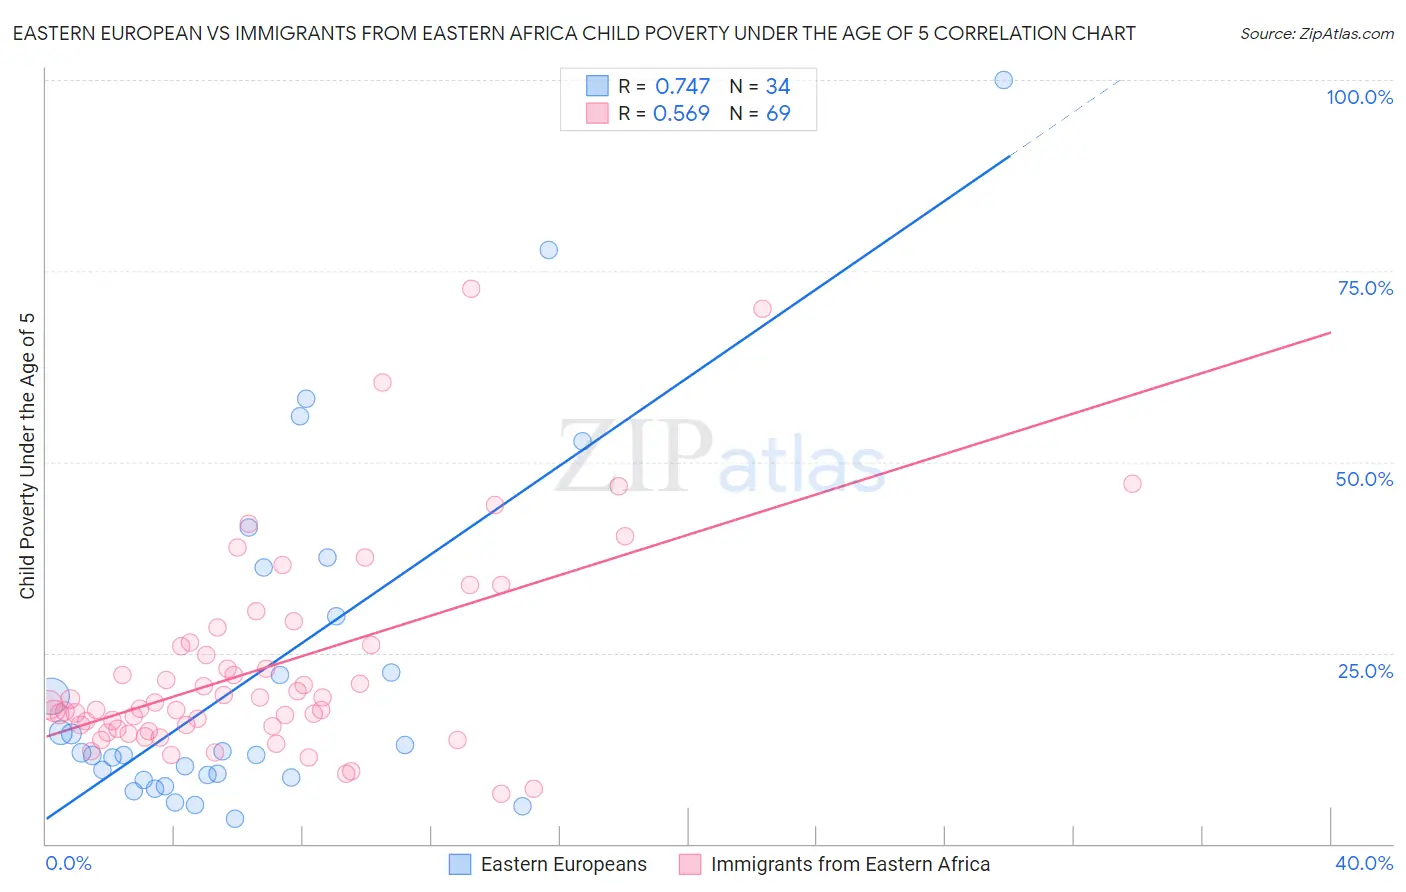 Eastern European vs Immigrants from Eastern Africa Child Poverty Under the Age of 5